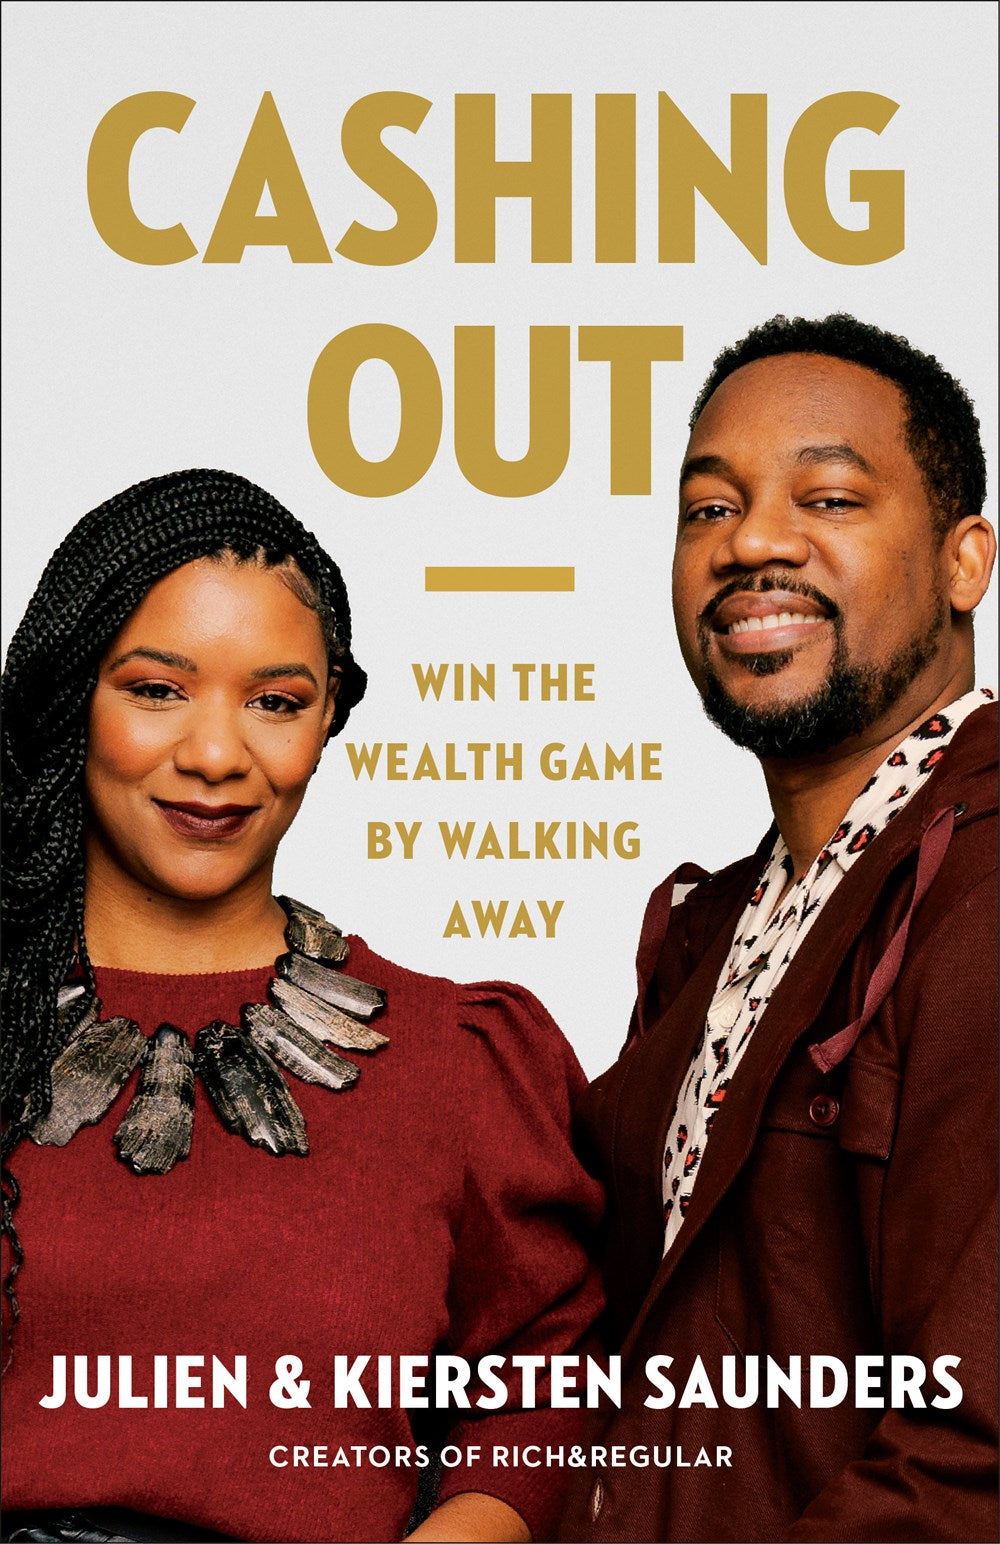 Cashing Out: Win the Wealth Game